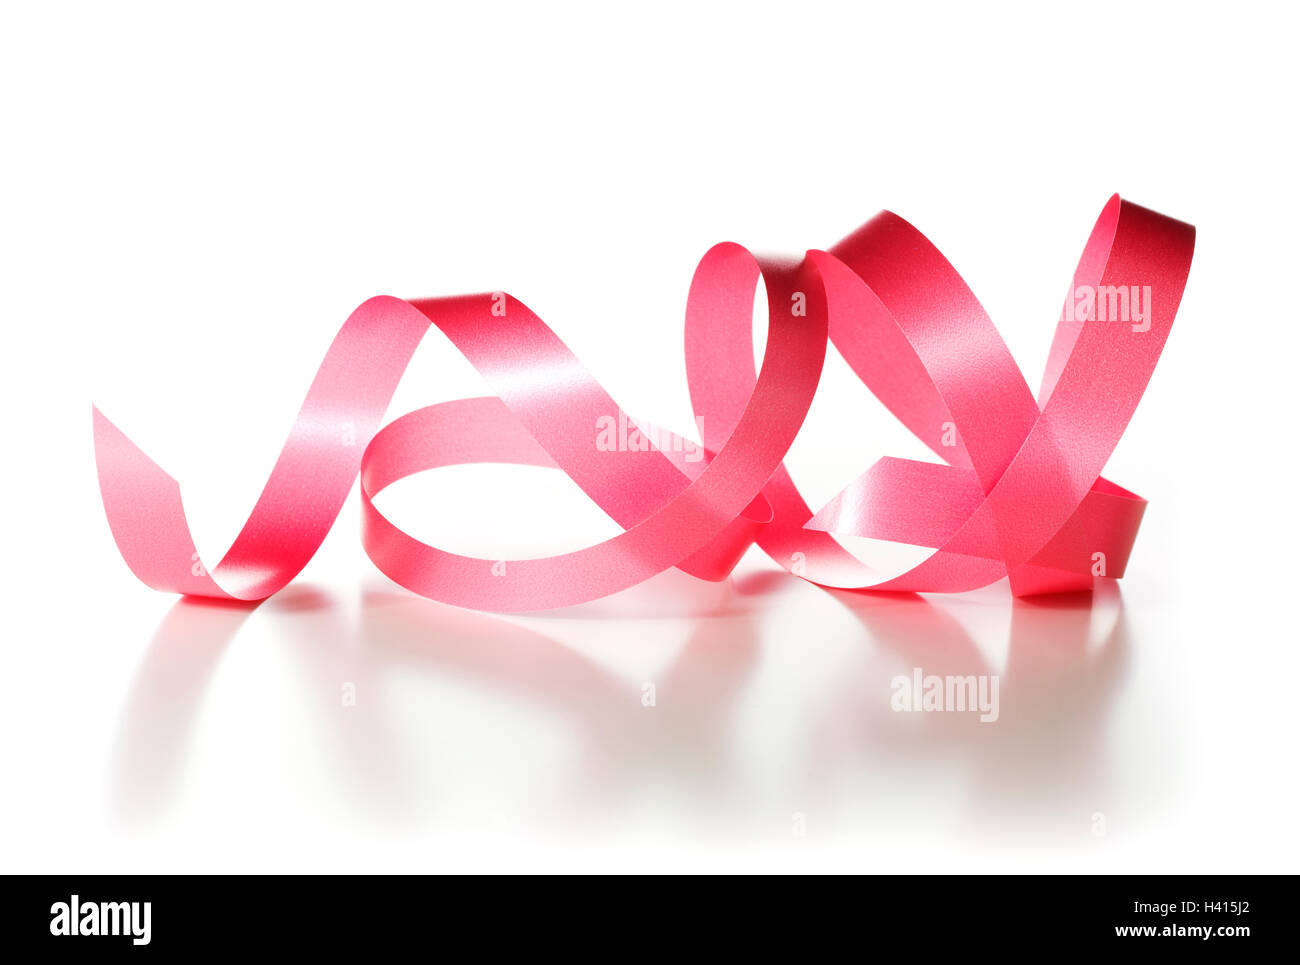 Red ribbon over white background, decorative element. Stock Photo